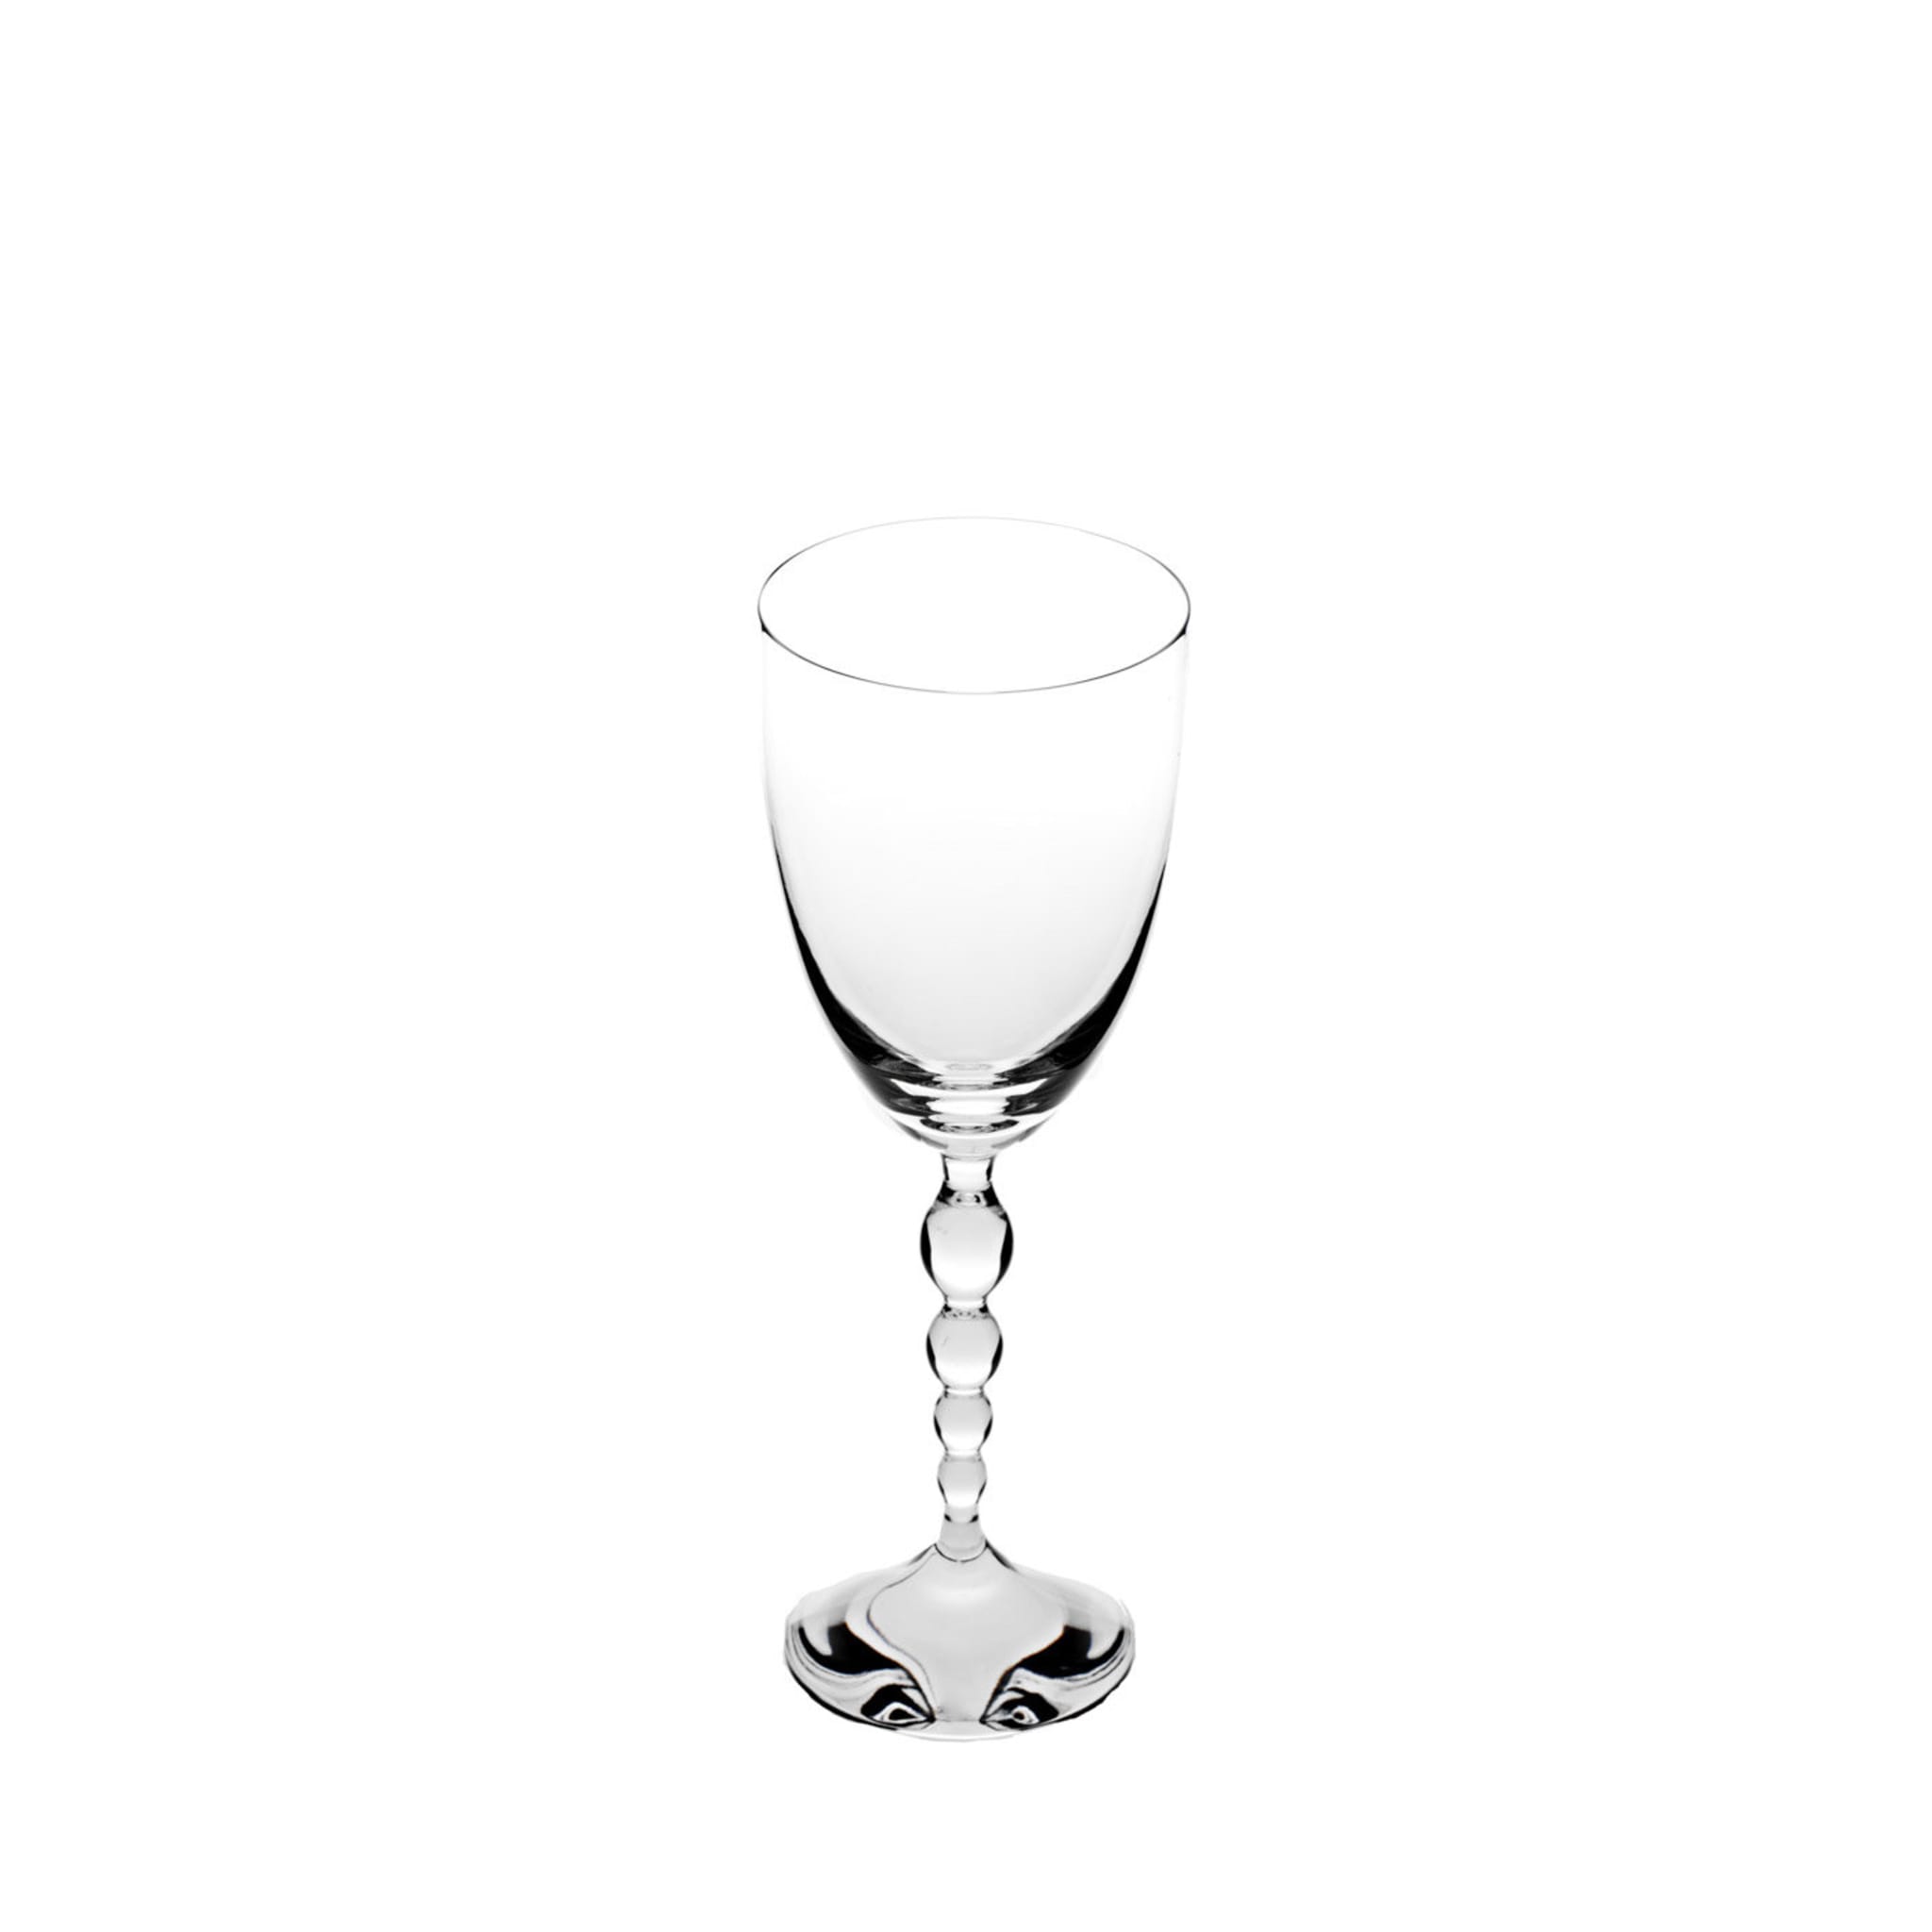 Set of 6 Collier Crystal Glasses N.2 - Alternative view 1